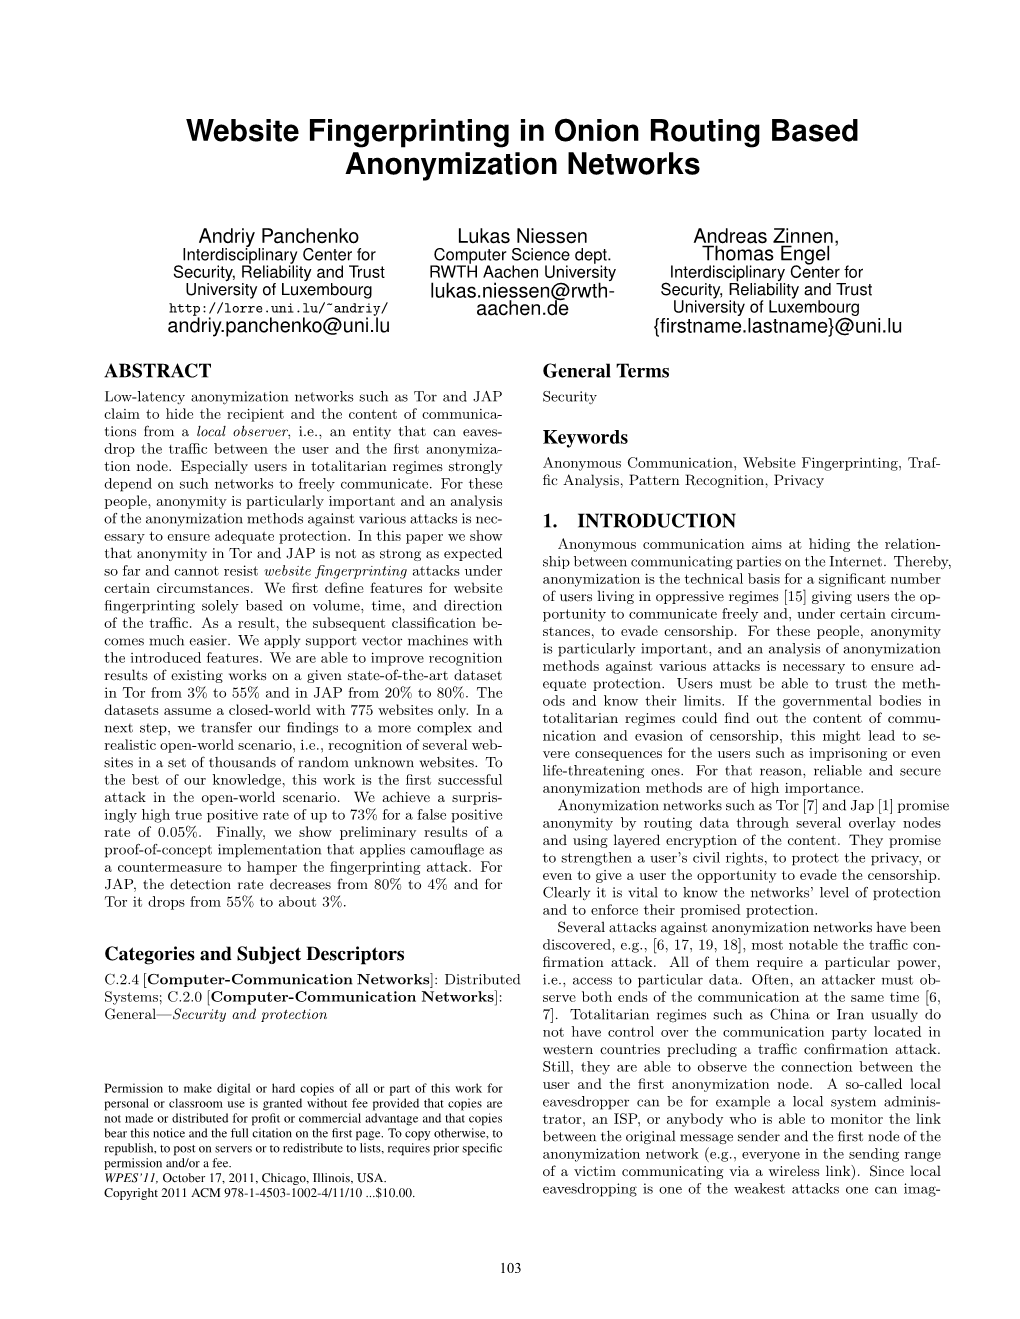 Website Fingerprinting in Onion Routing Based Anonymization Networks